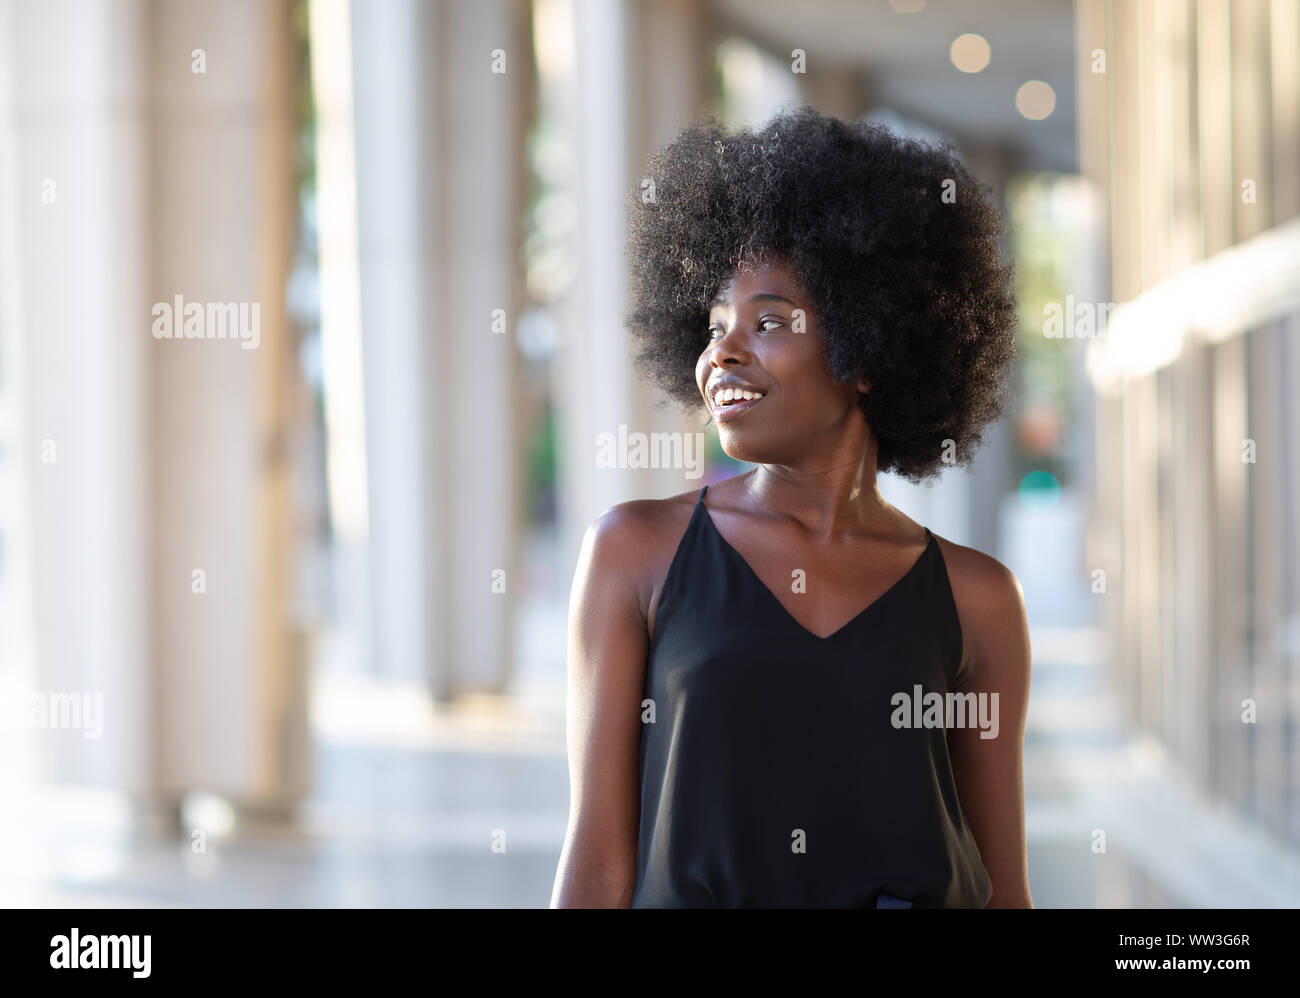 Smiling young black woman walking in the city looking to the side ...